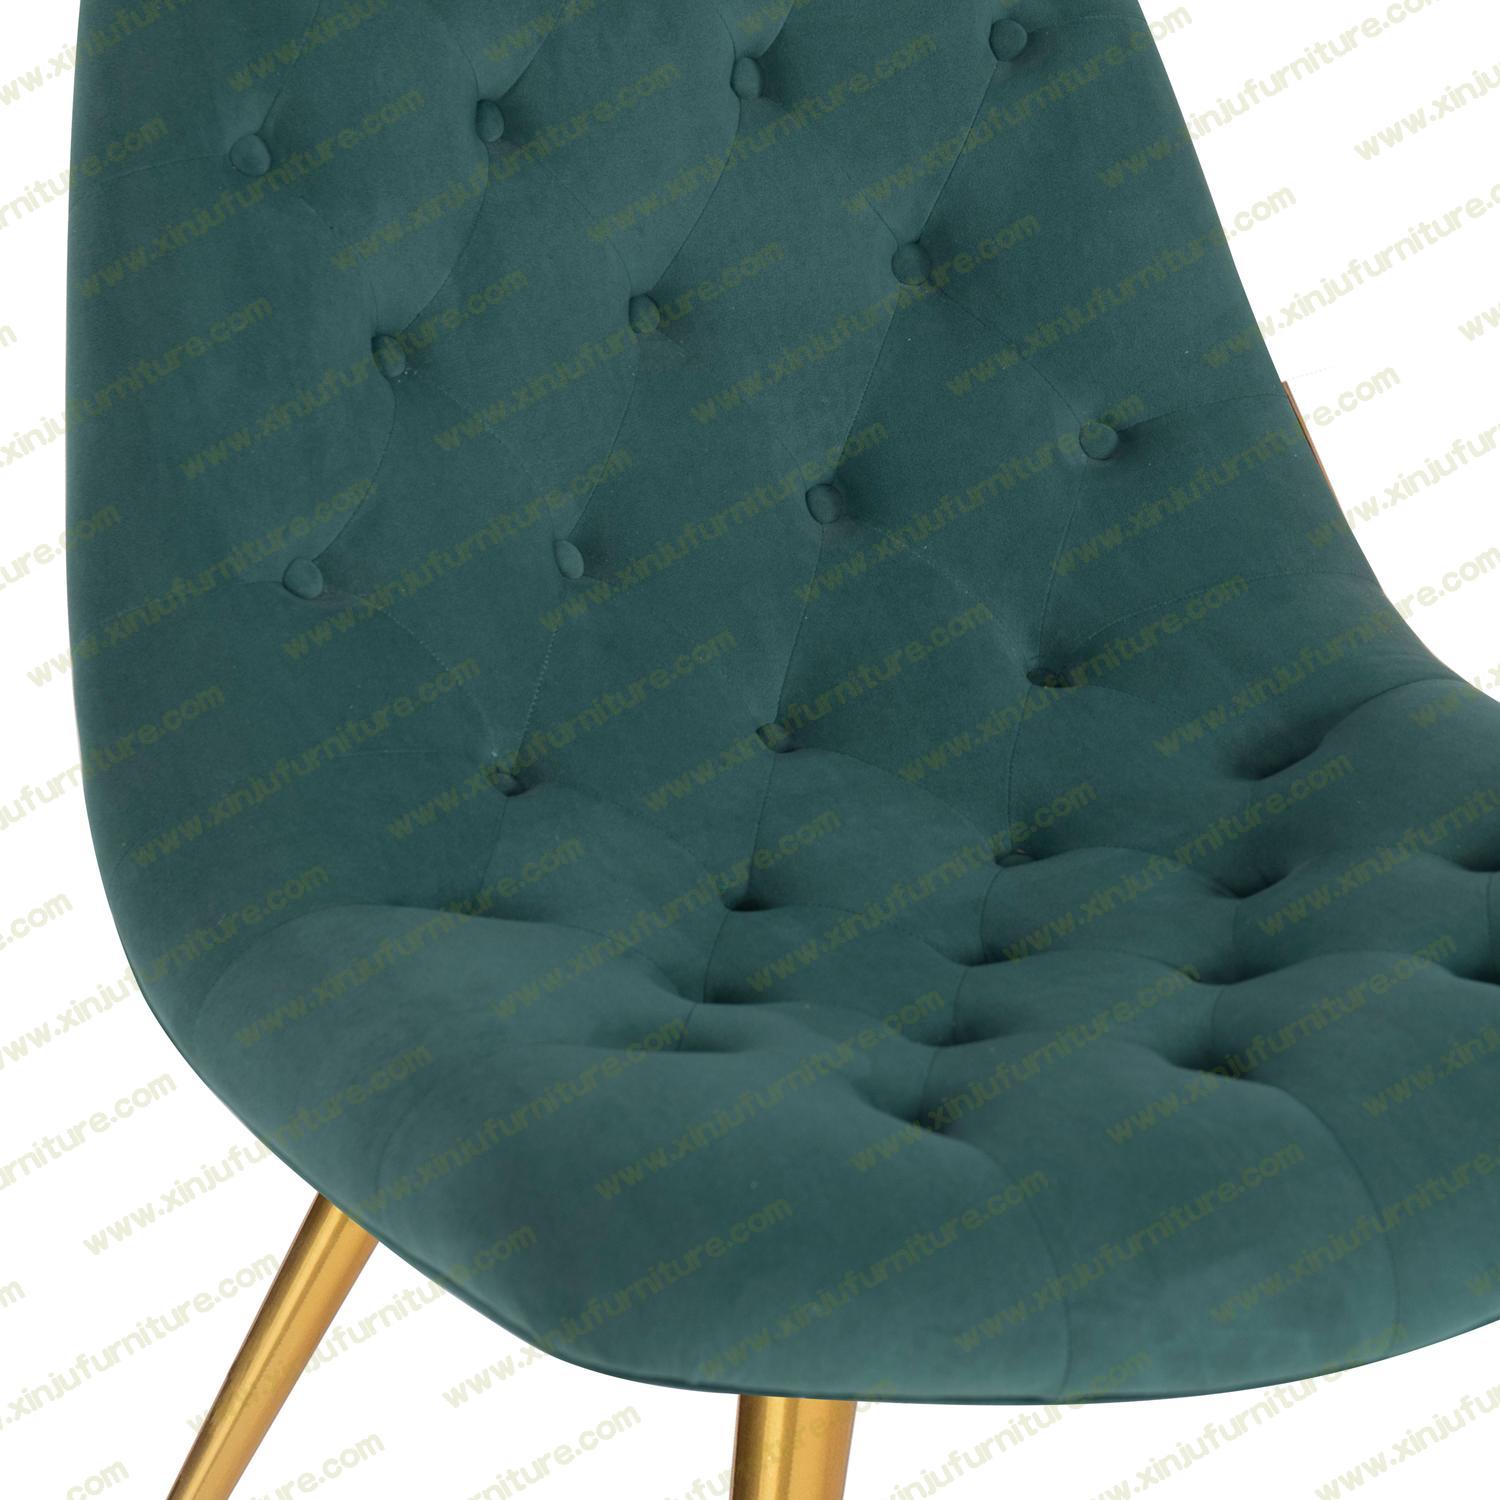 High grade thickened comfortable green leisure chair